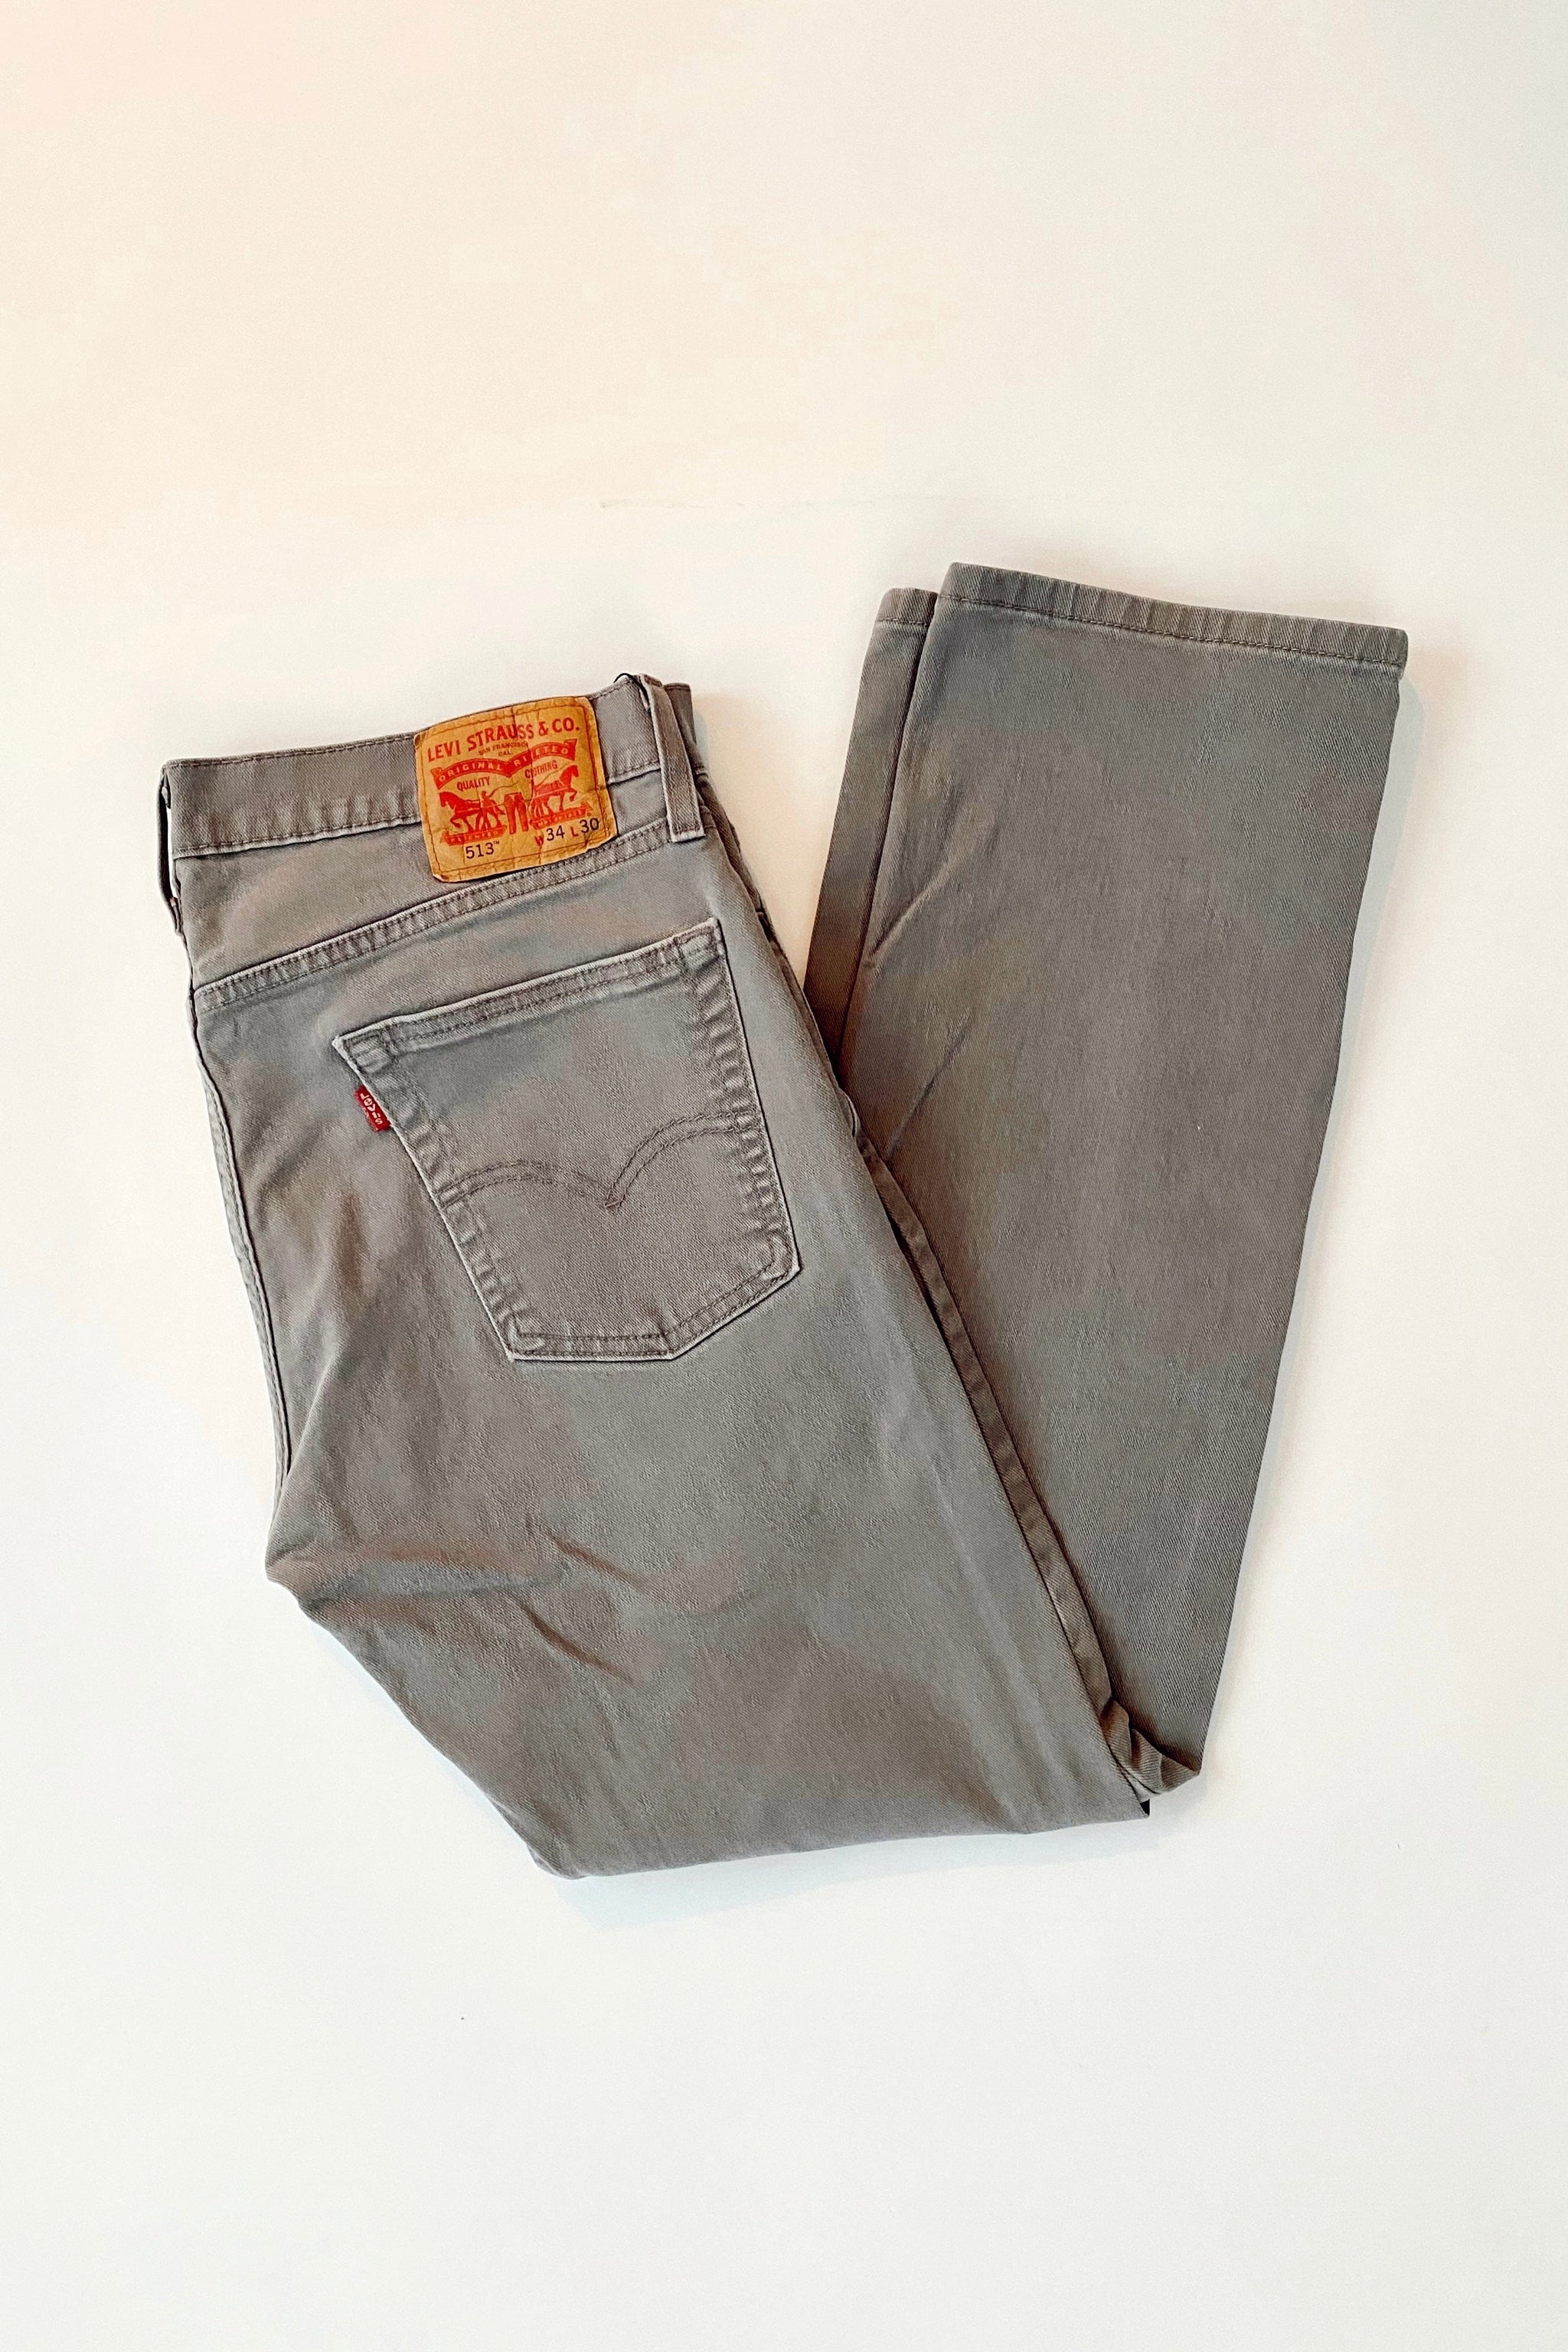 Preloved Levi's 513 Gray Jeans / Size 32 - COUTONIC